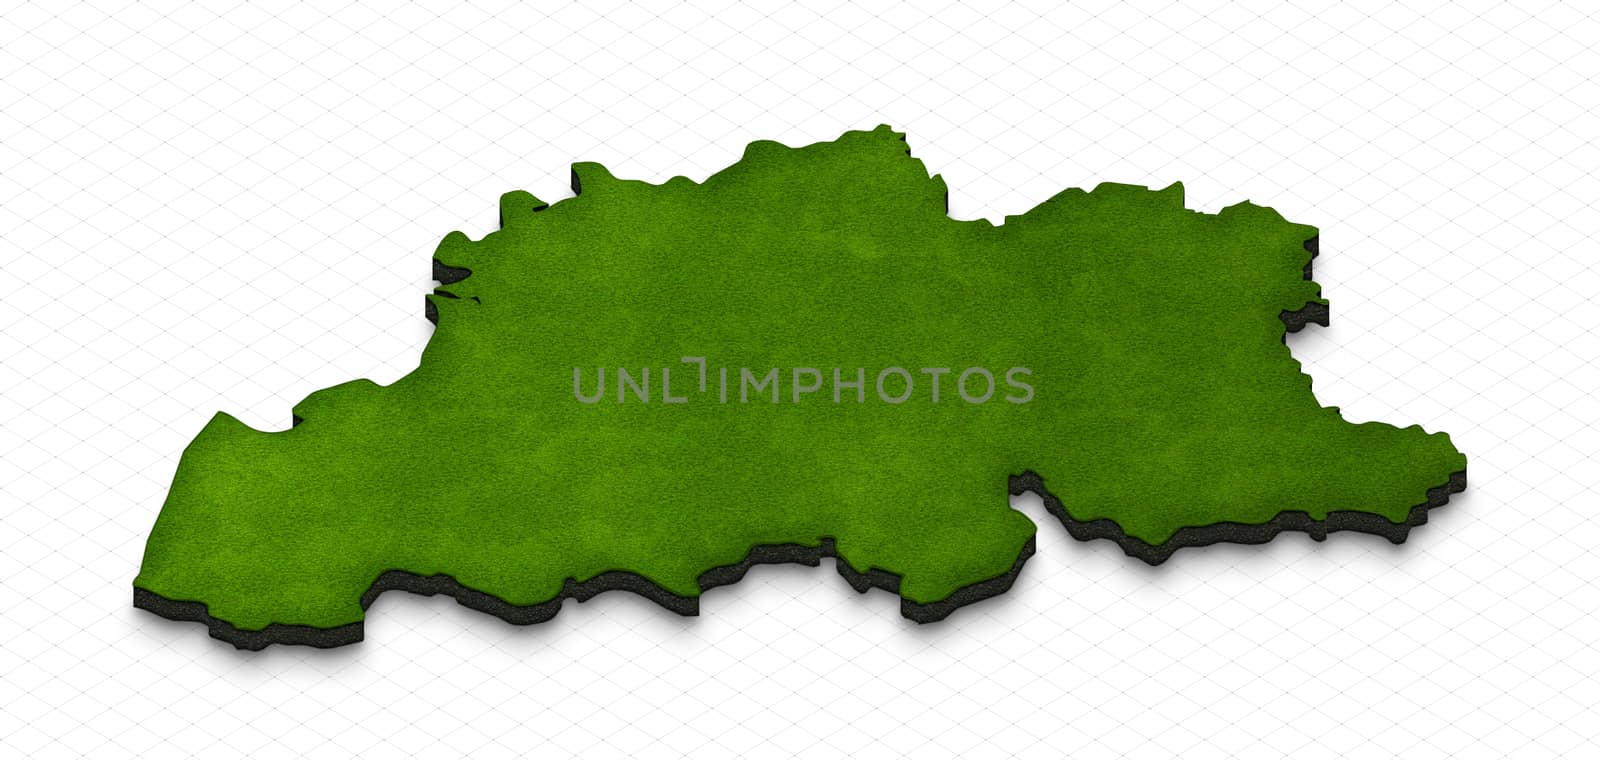 Illustration of a green ground map of Belgium on grid background. Right 3D isometric perspective projection.